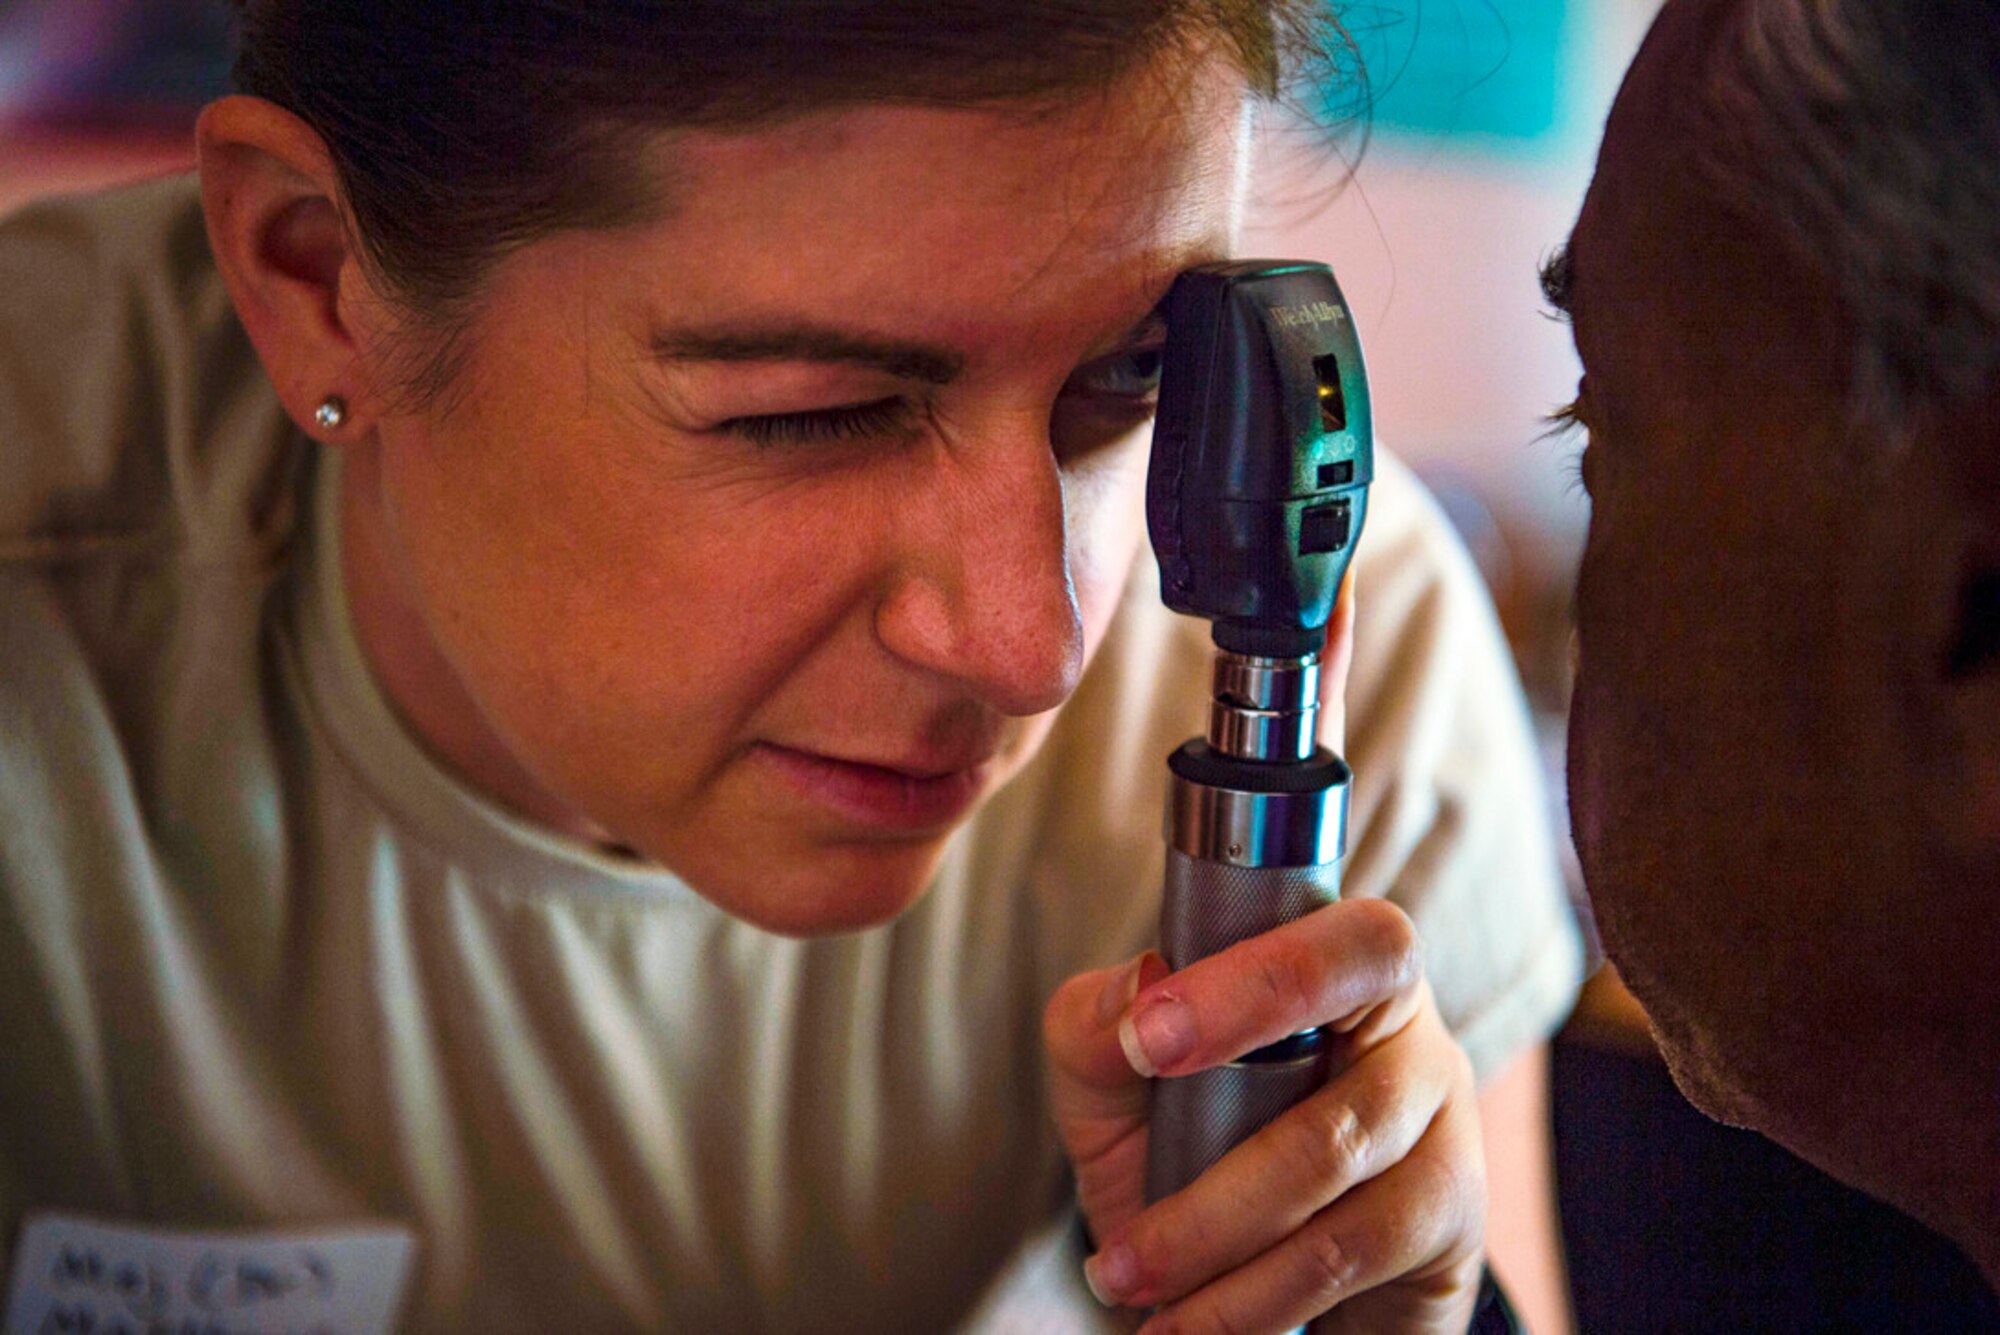 Maj. Lauren Matthews, 18th Medical Group optometrist, Kadena Air Base, Japan, examines a patient’s eye during Pacific Angel18-4 in Vavuniya, Sri Lanka, Aug. 17, 2018. PAC ANGEL 18 is a joint and combined engagement that enhances participating nations’ humanitarian assistance and disaster relief capabilities while providing beneficial services to people in need throughout South and Southeast Asia and includes general health, dental, optometry, pediatrics and engineering programs as well as various subject-matter expert exchanges. (U.S. Air Force photo by Tech. Sgt. Heather Redman)